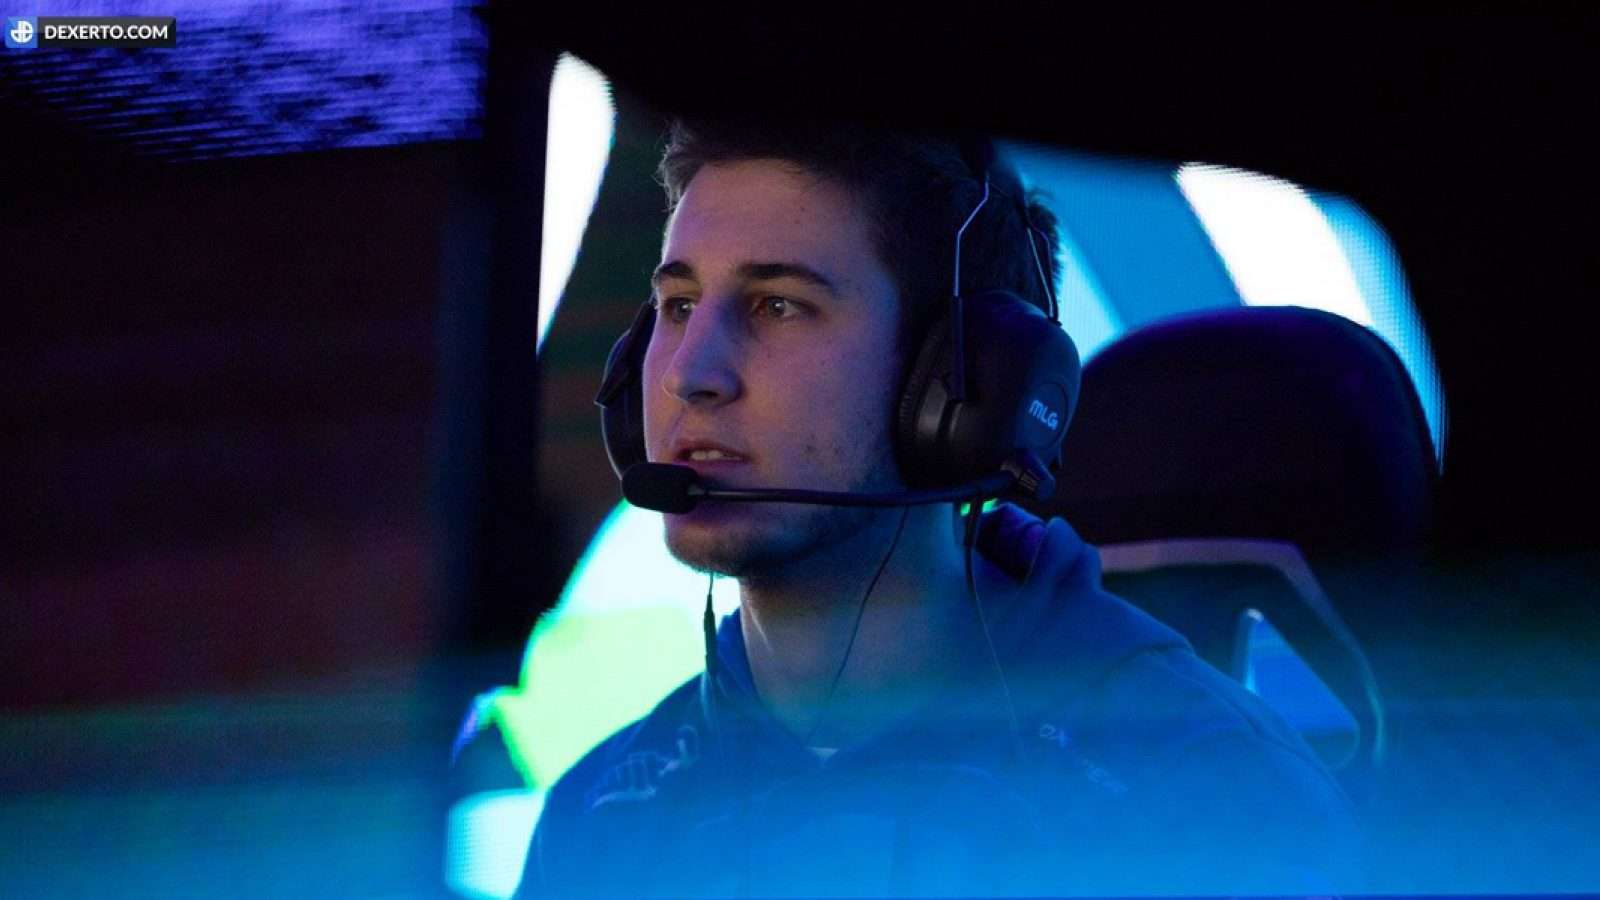 JKap competing in Call of Duty.